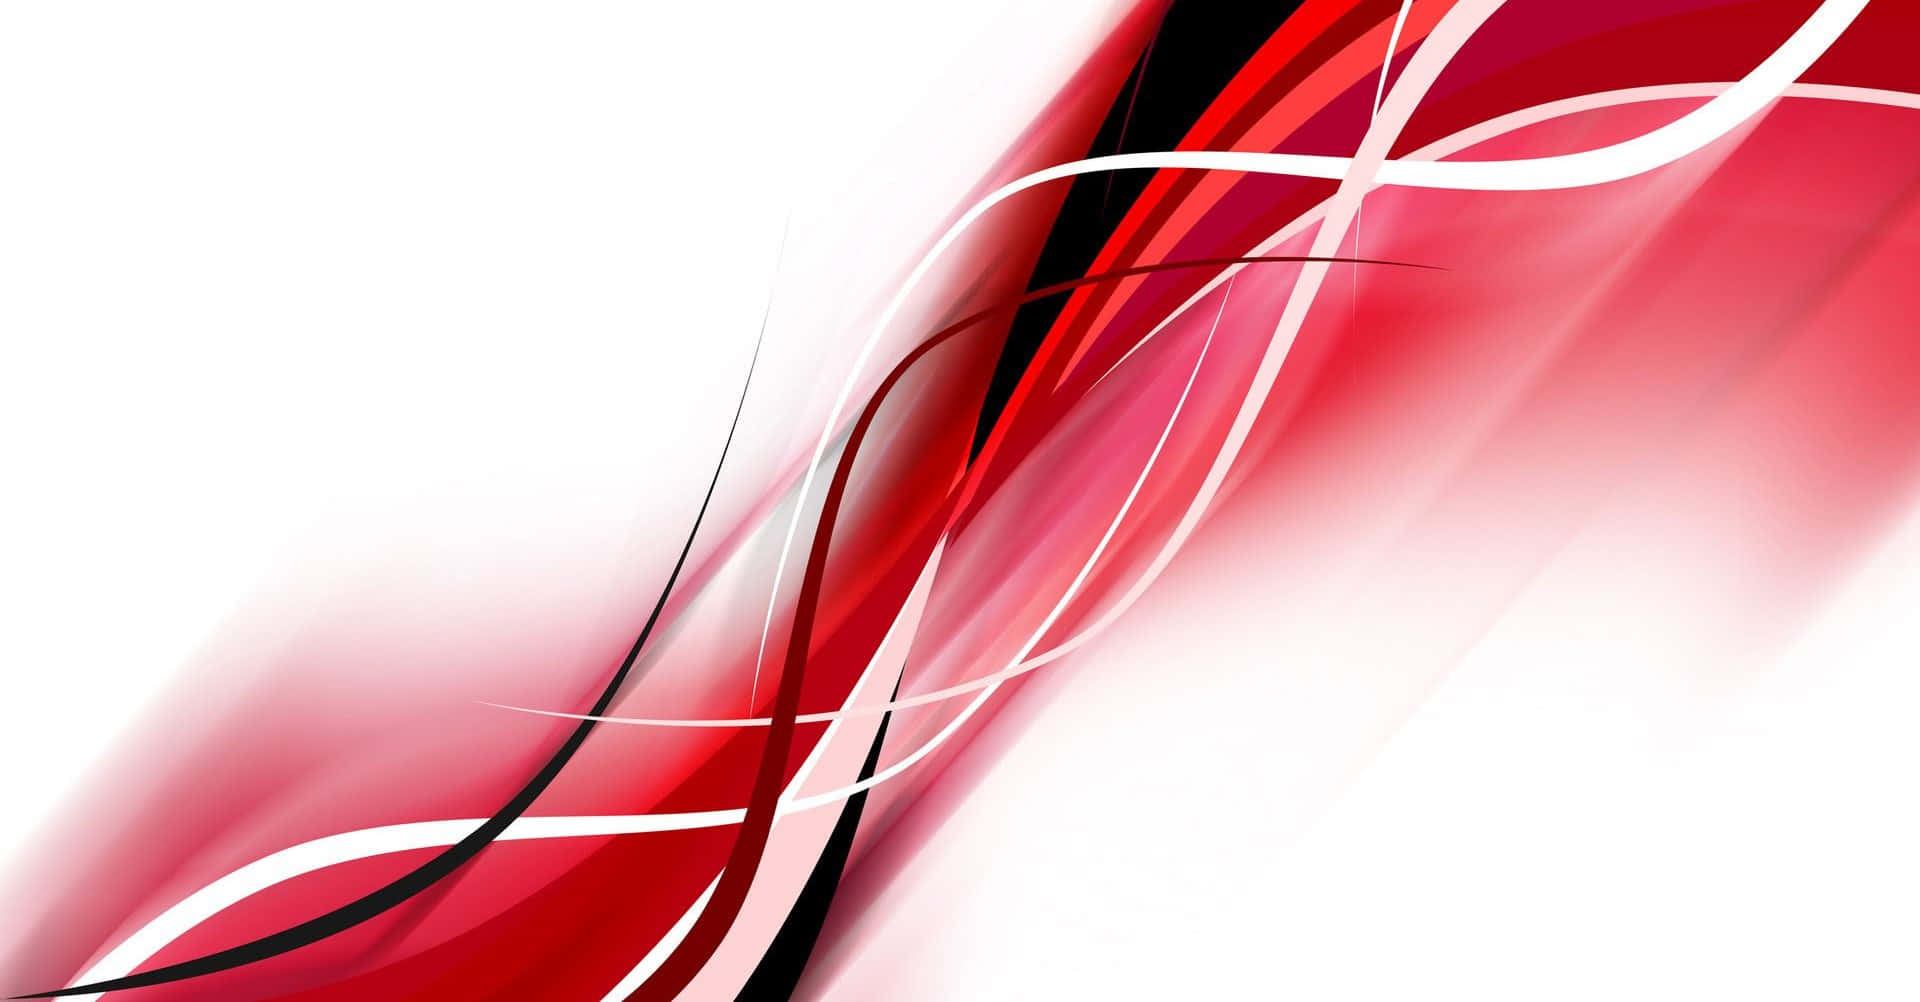 'Abstract Red Background: Feel the Energy of the Color'